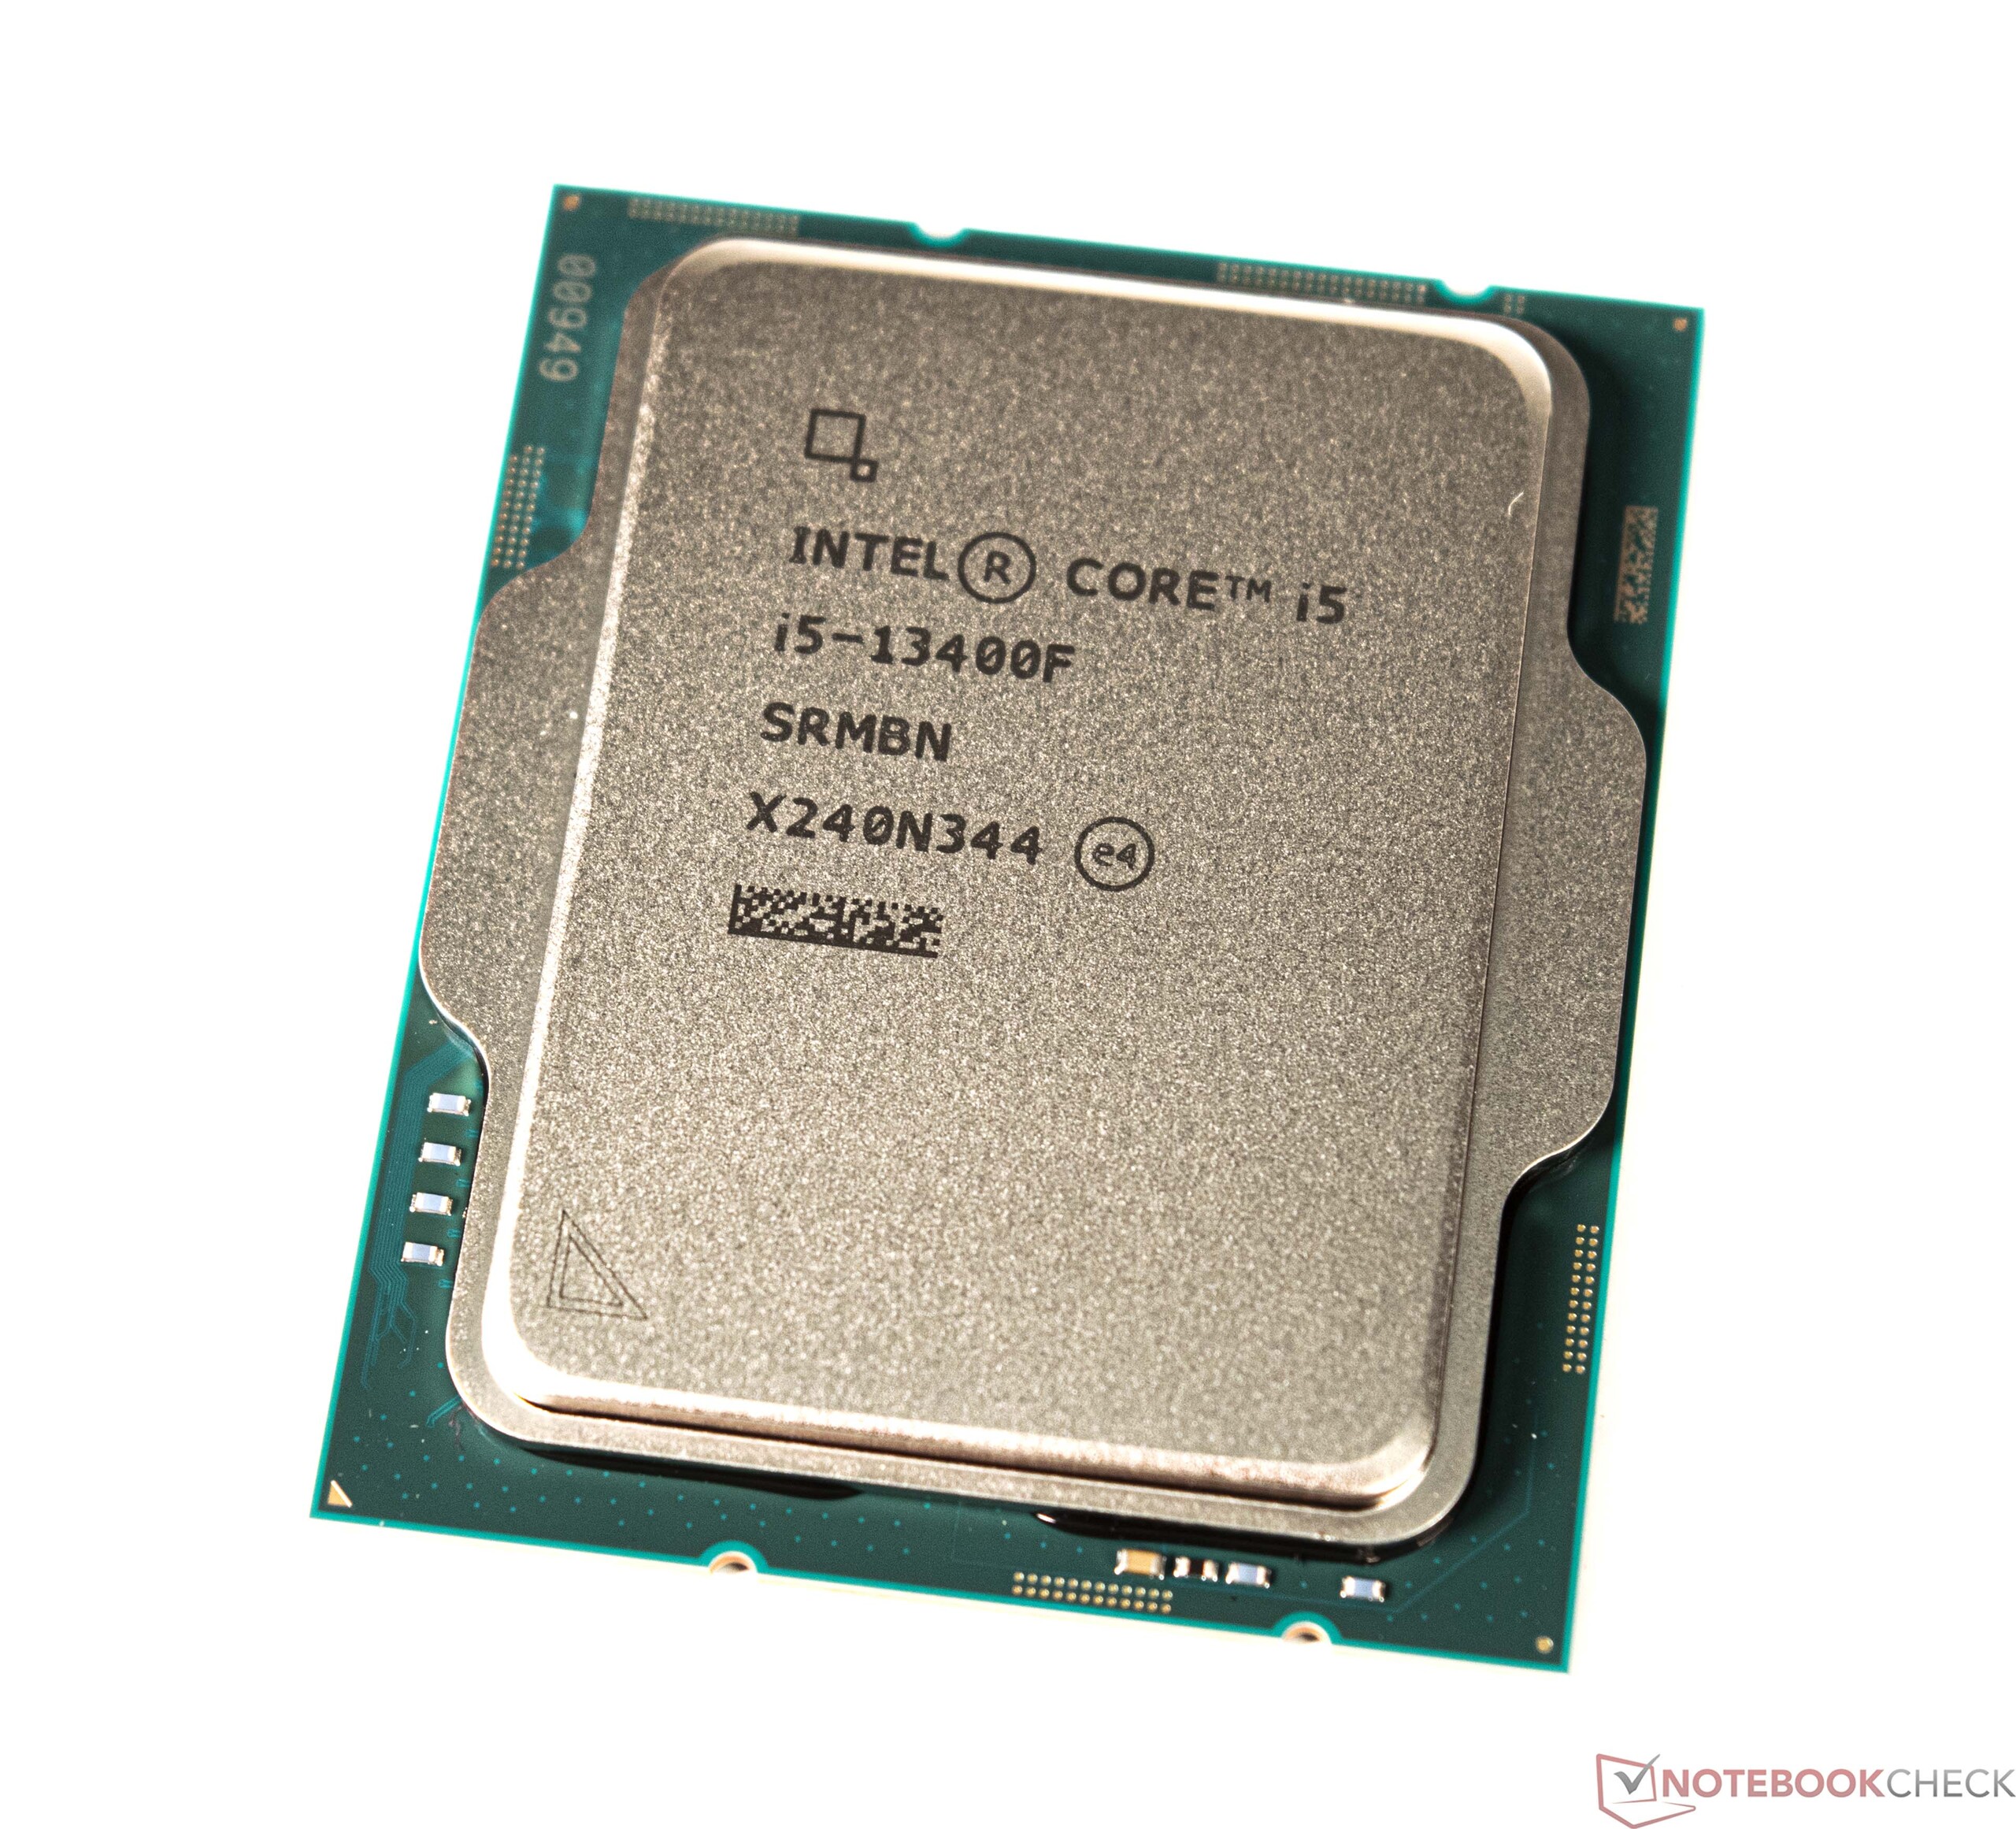 Intel Core iF desktop CPU in review: Economical and